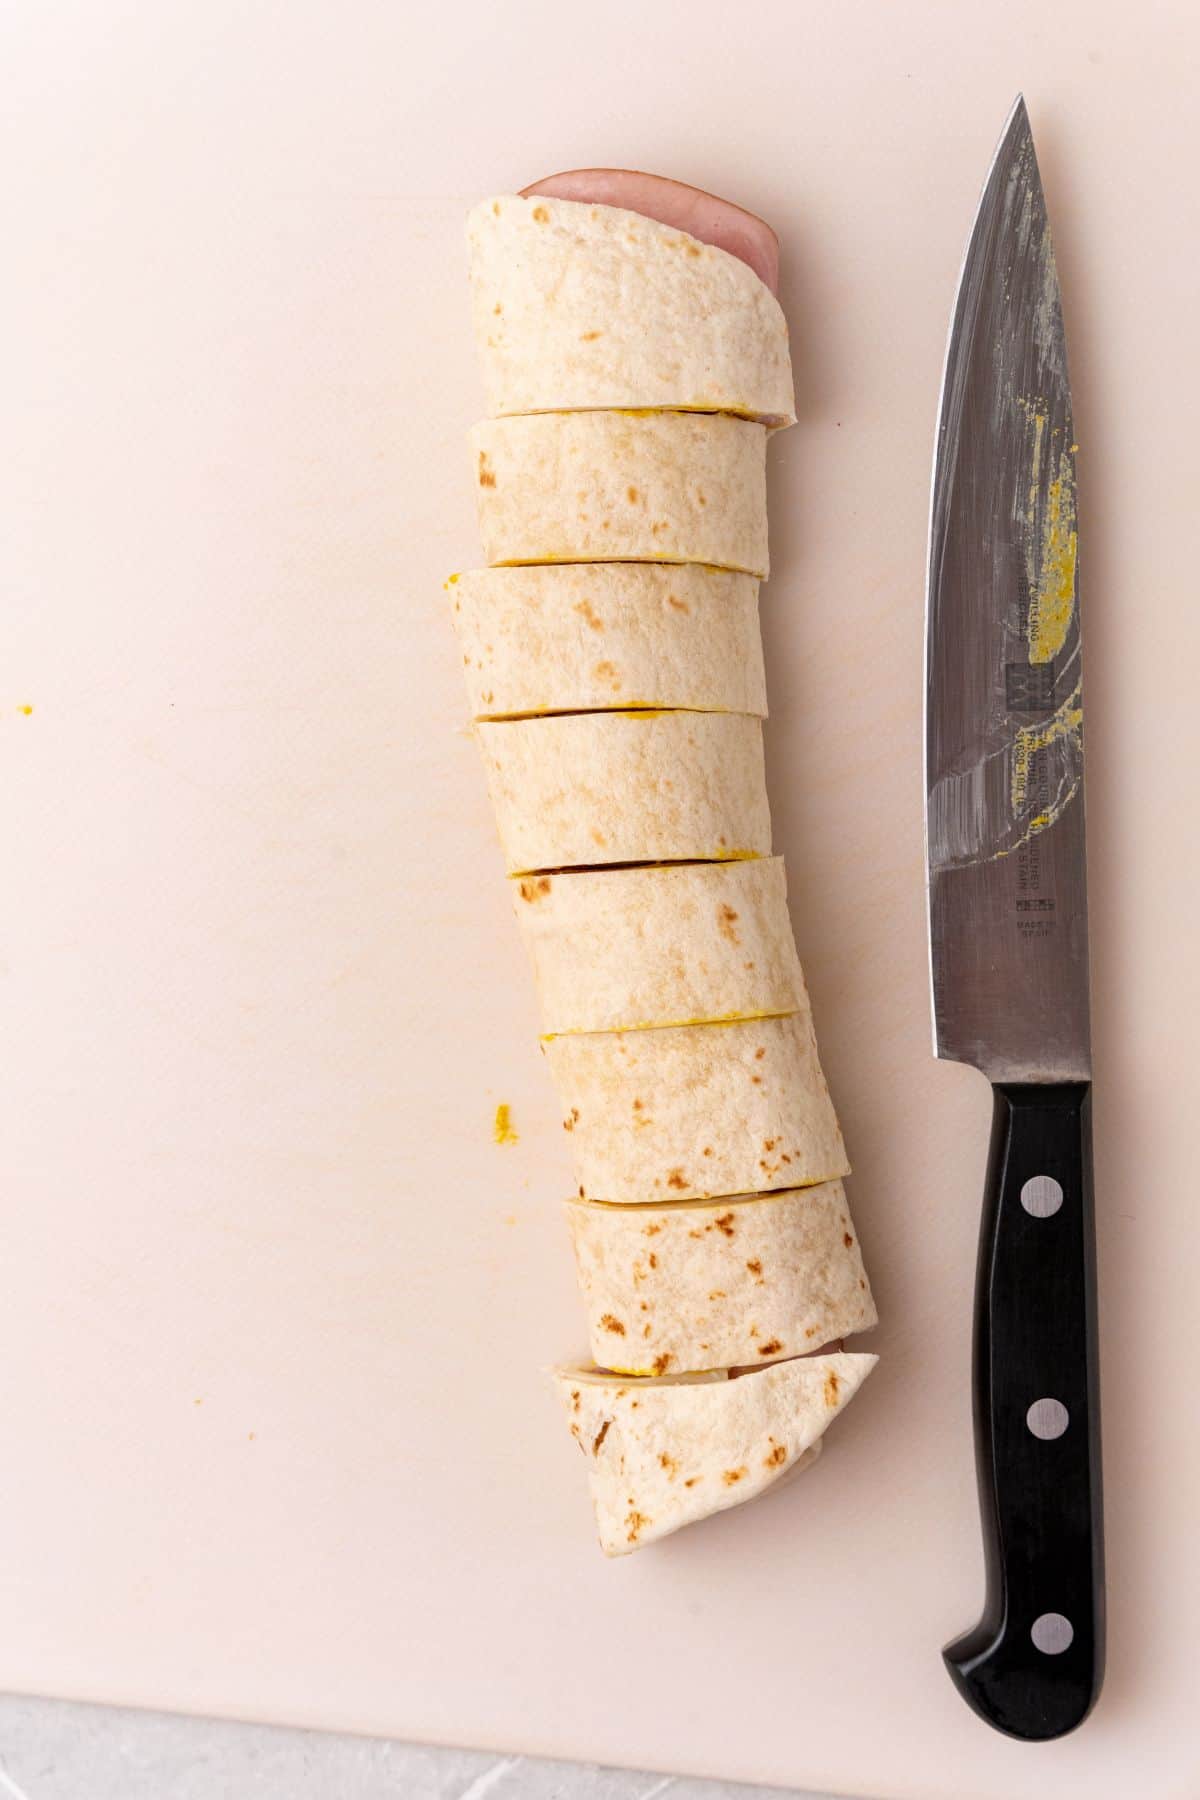 A knife next to a tortilla, ready to be filled with delicious wraps made of ham and cheese.